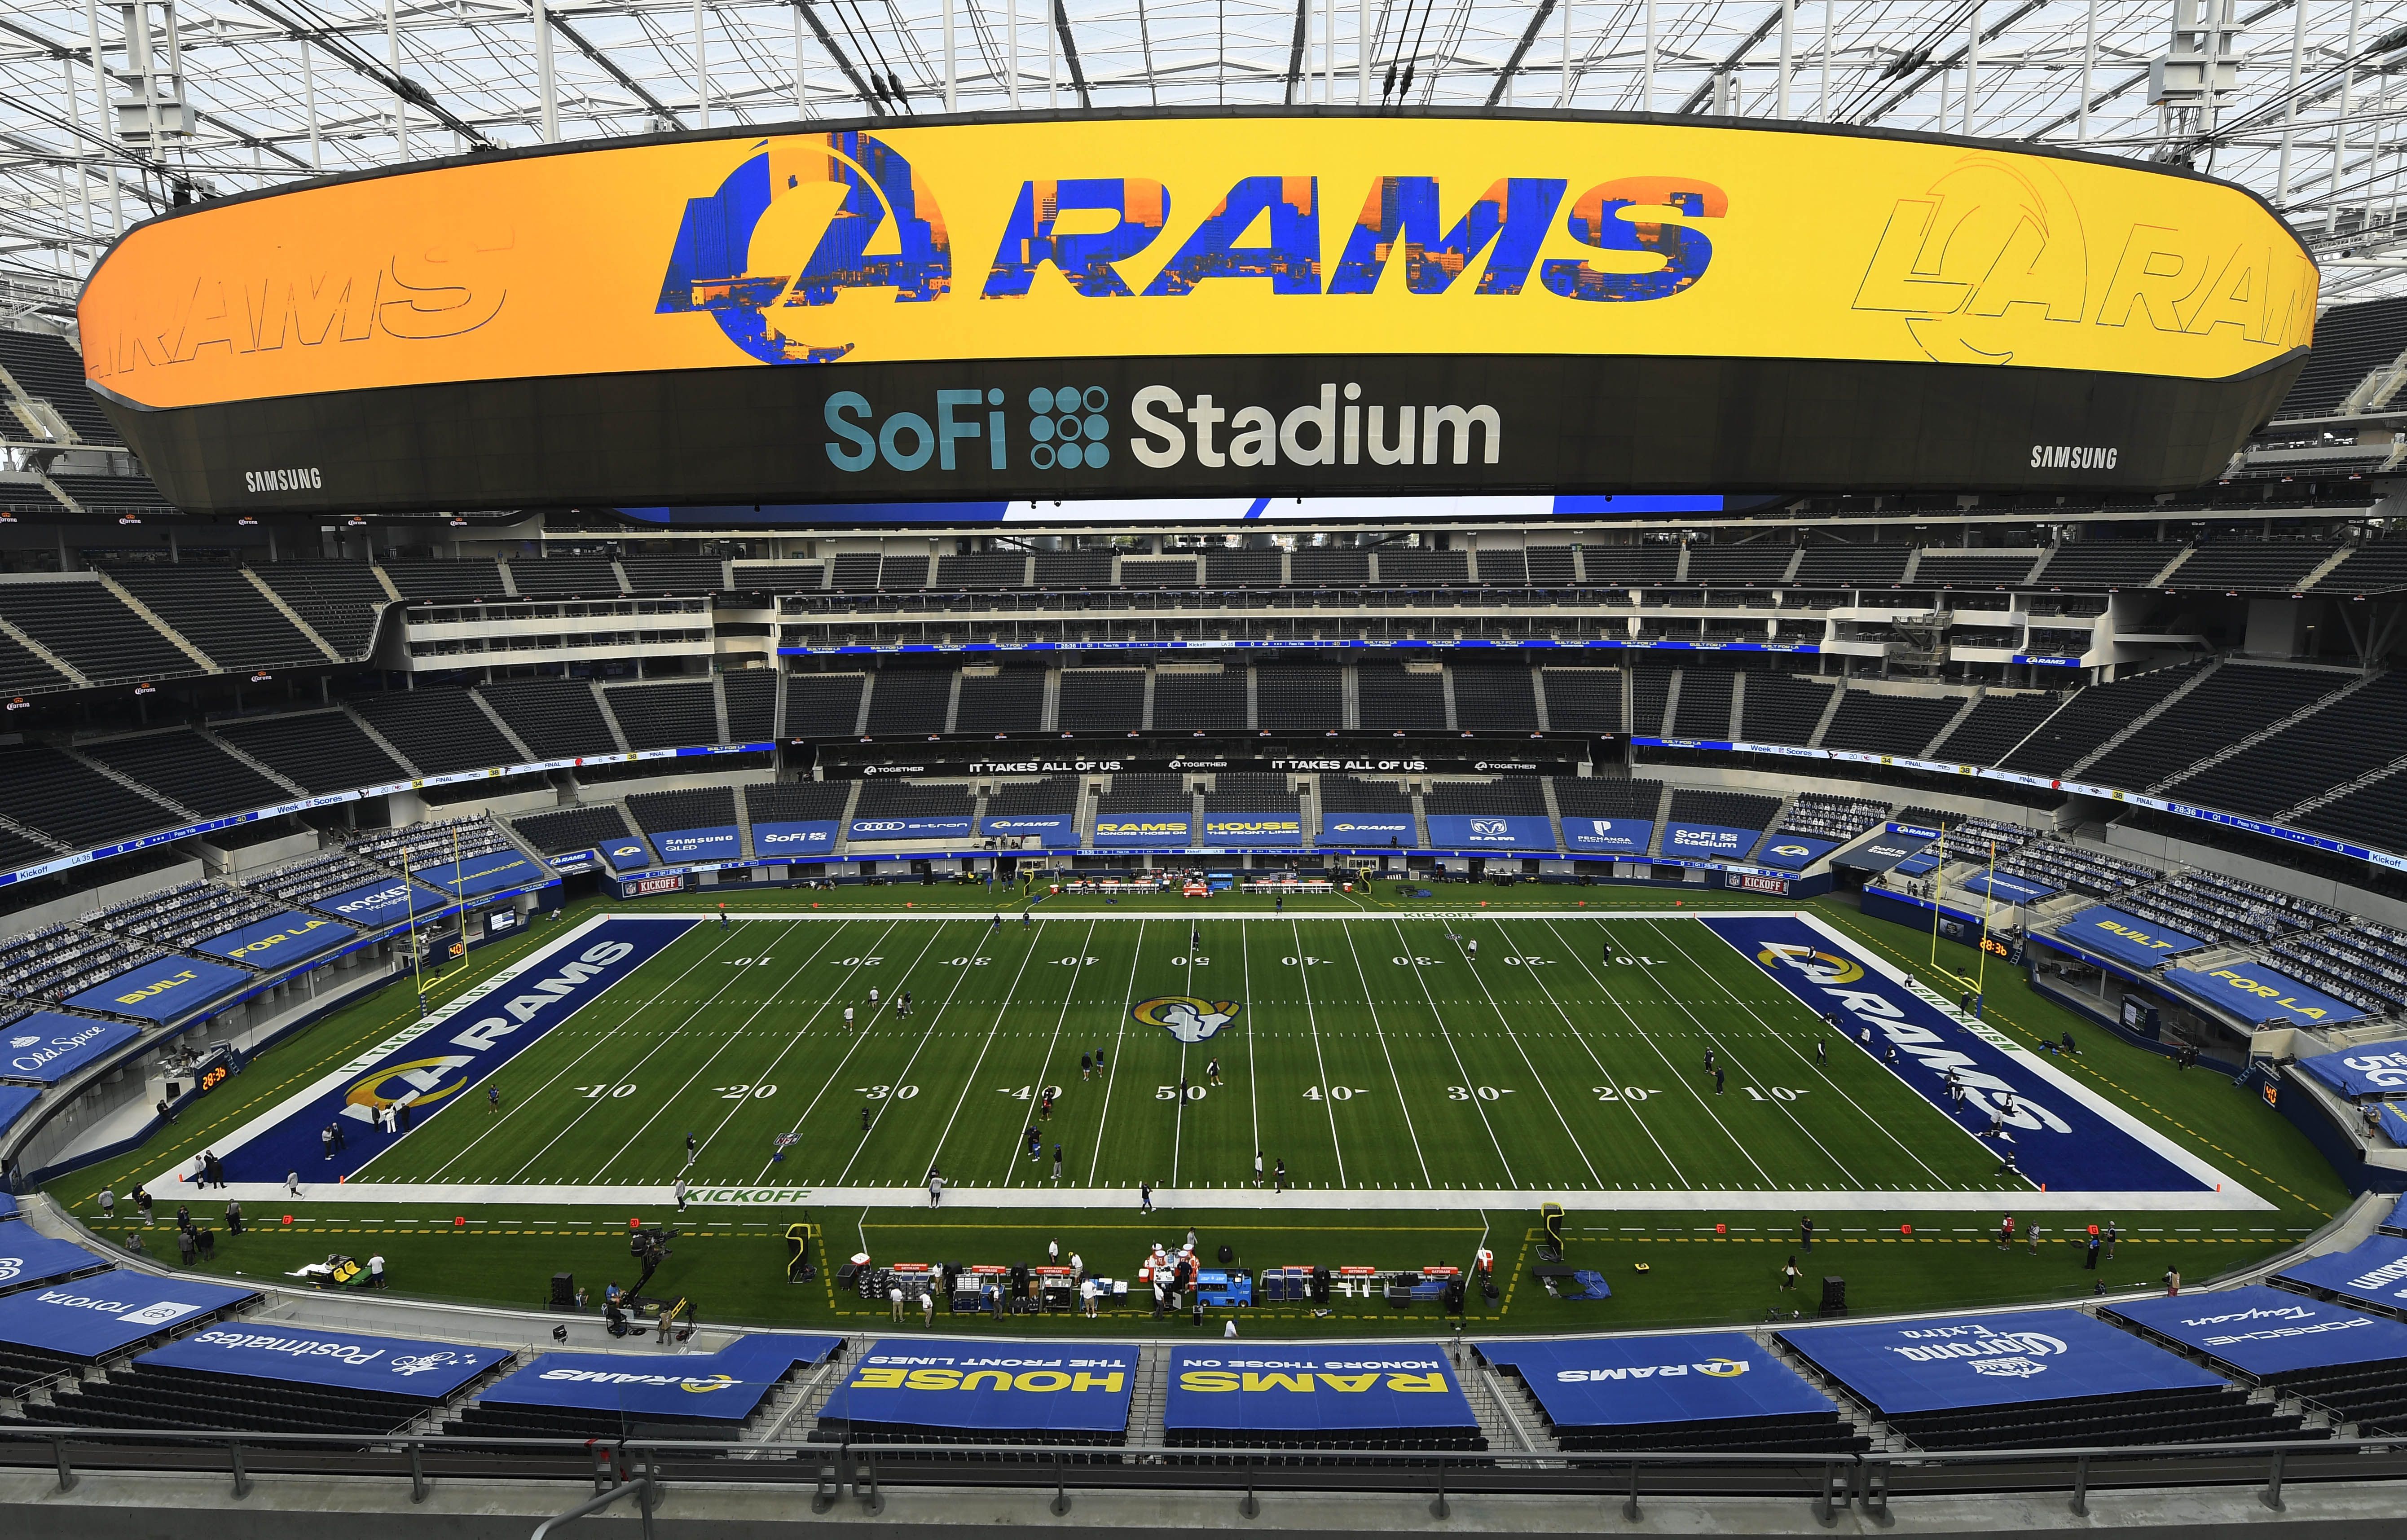 L.A. Rams, Chargers to allow SoFi Stadium to serve as voting center in NFL vote initiative